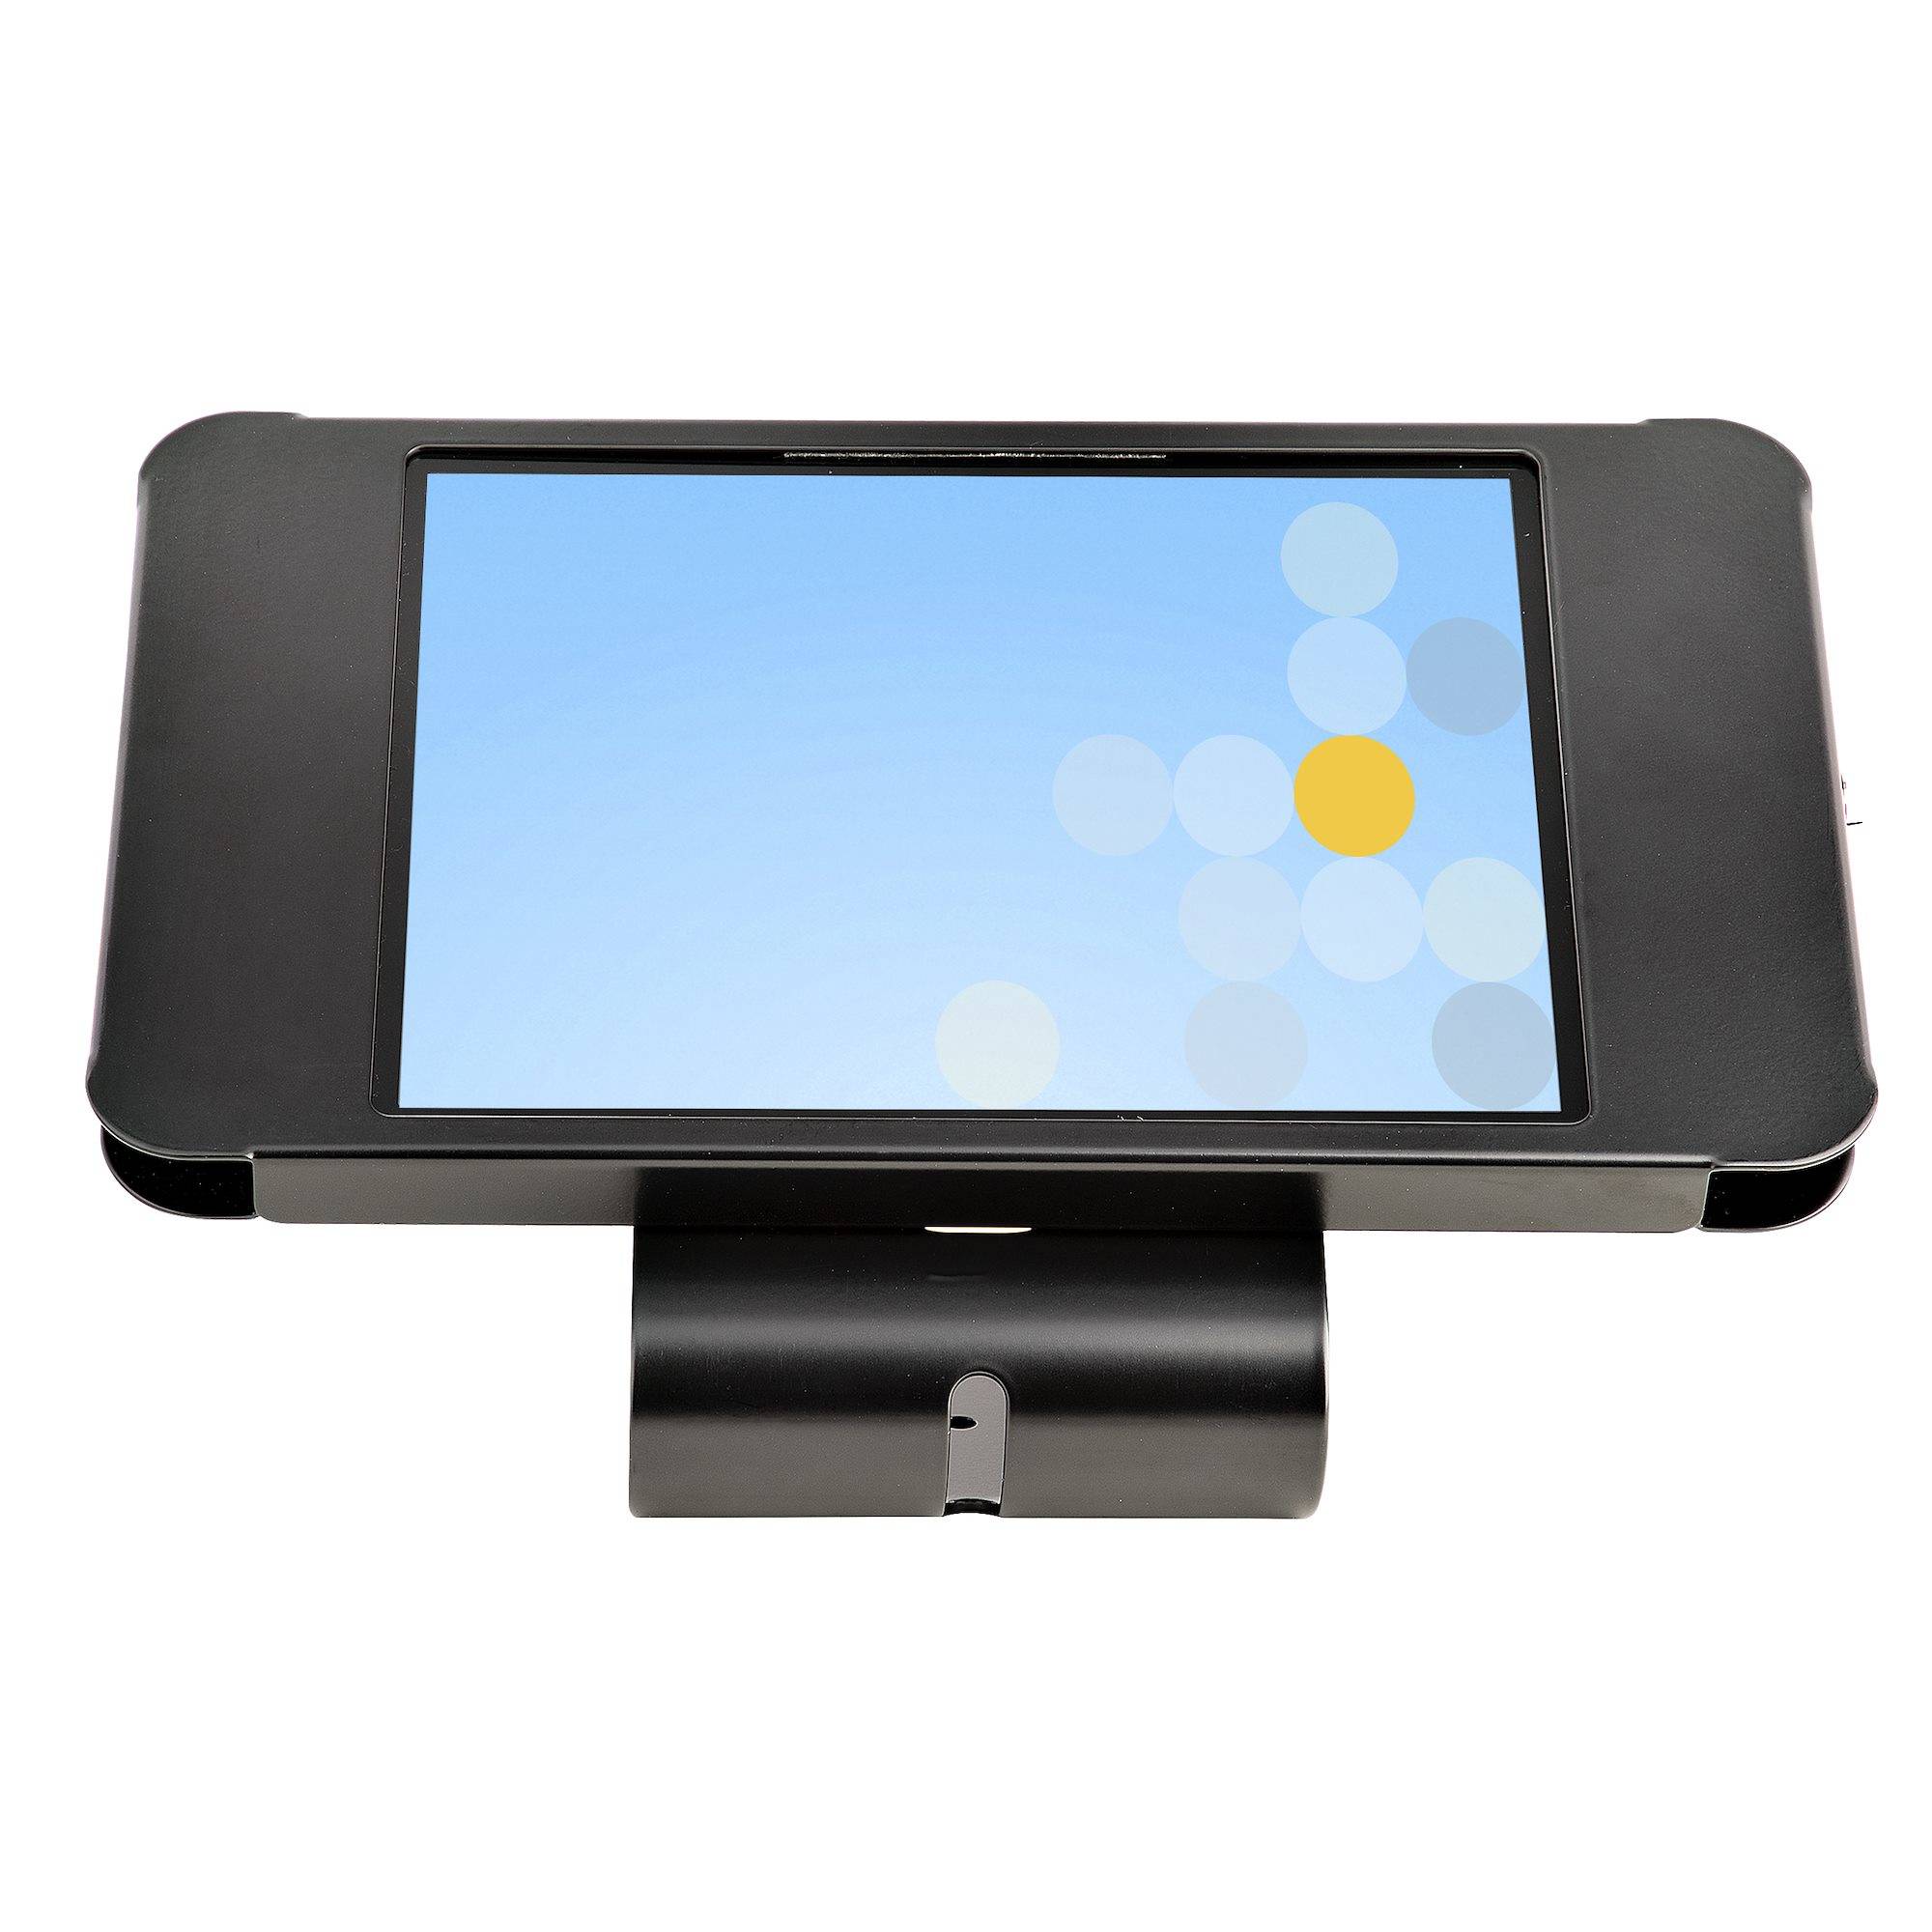 Rca Informatique - image du produit : SECURE TABLET STAND - IPAD OR OTHER TABLET 10.2IN / 10.5IN